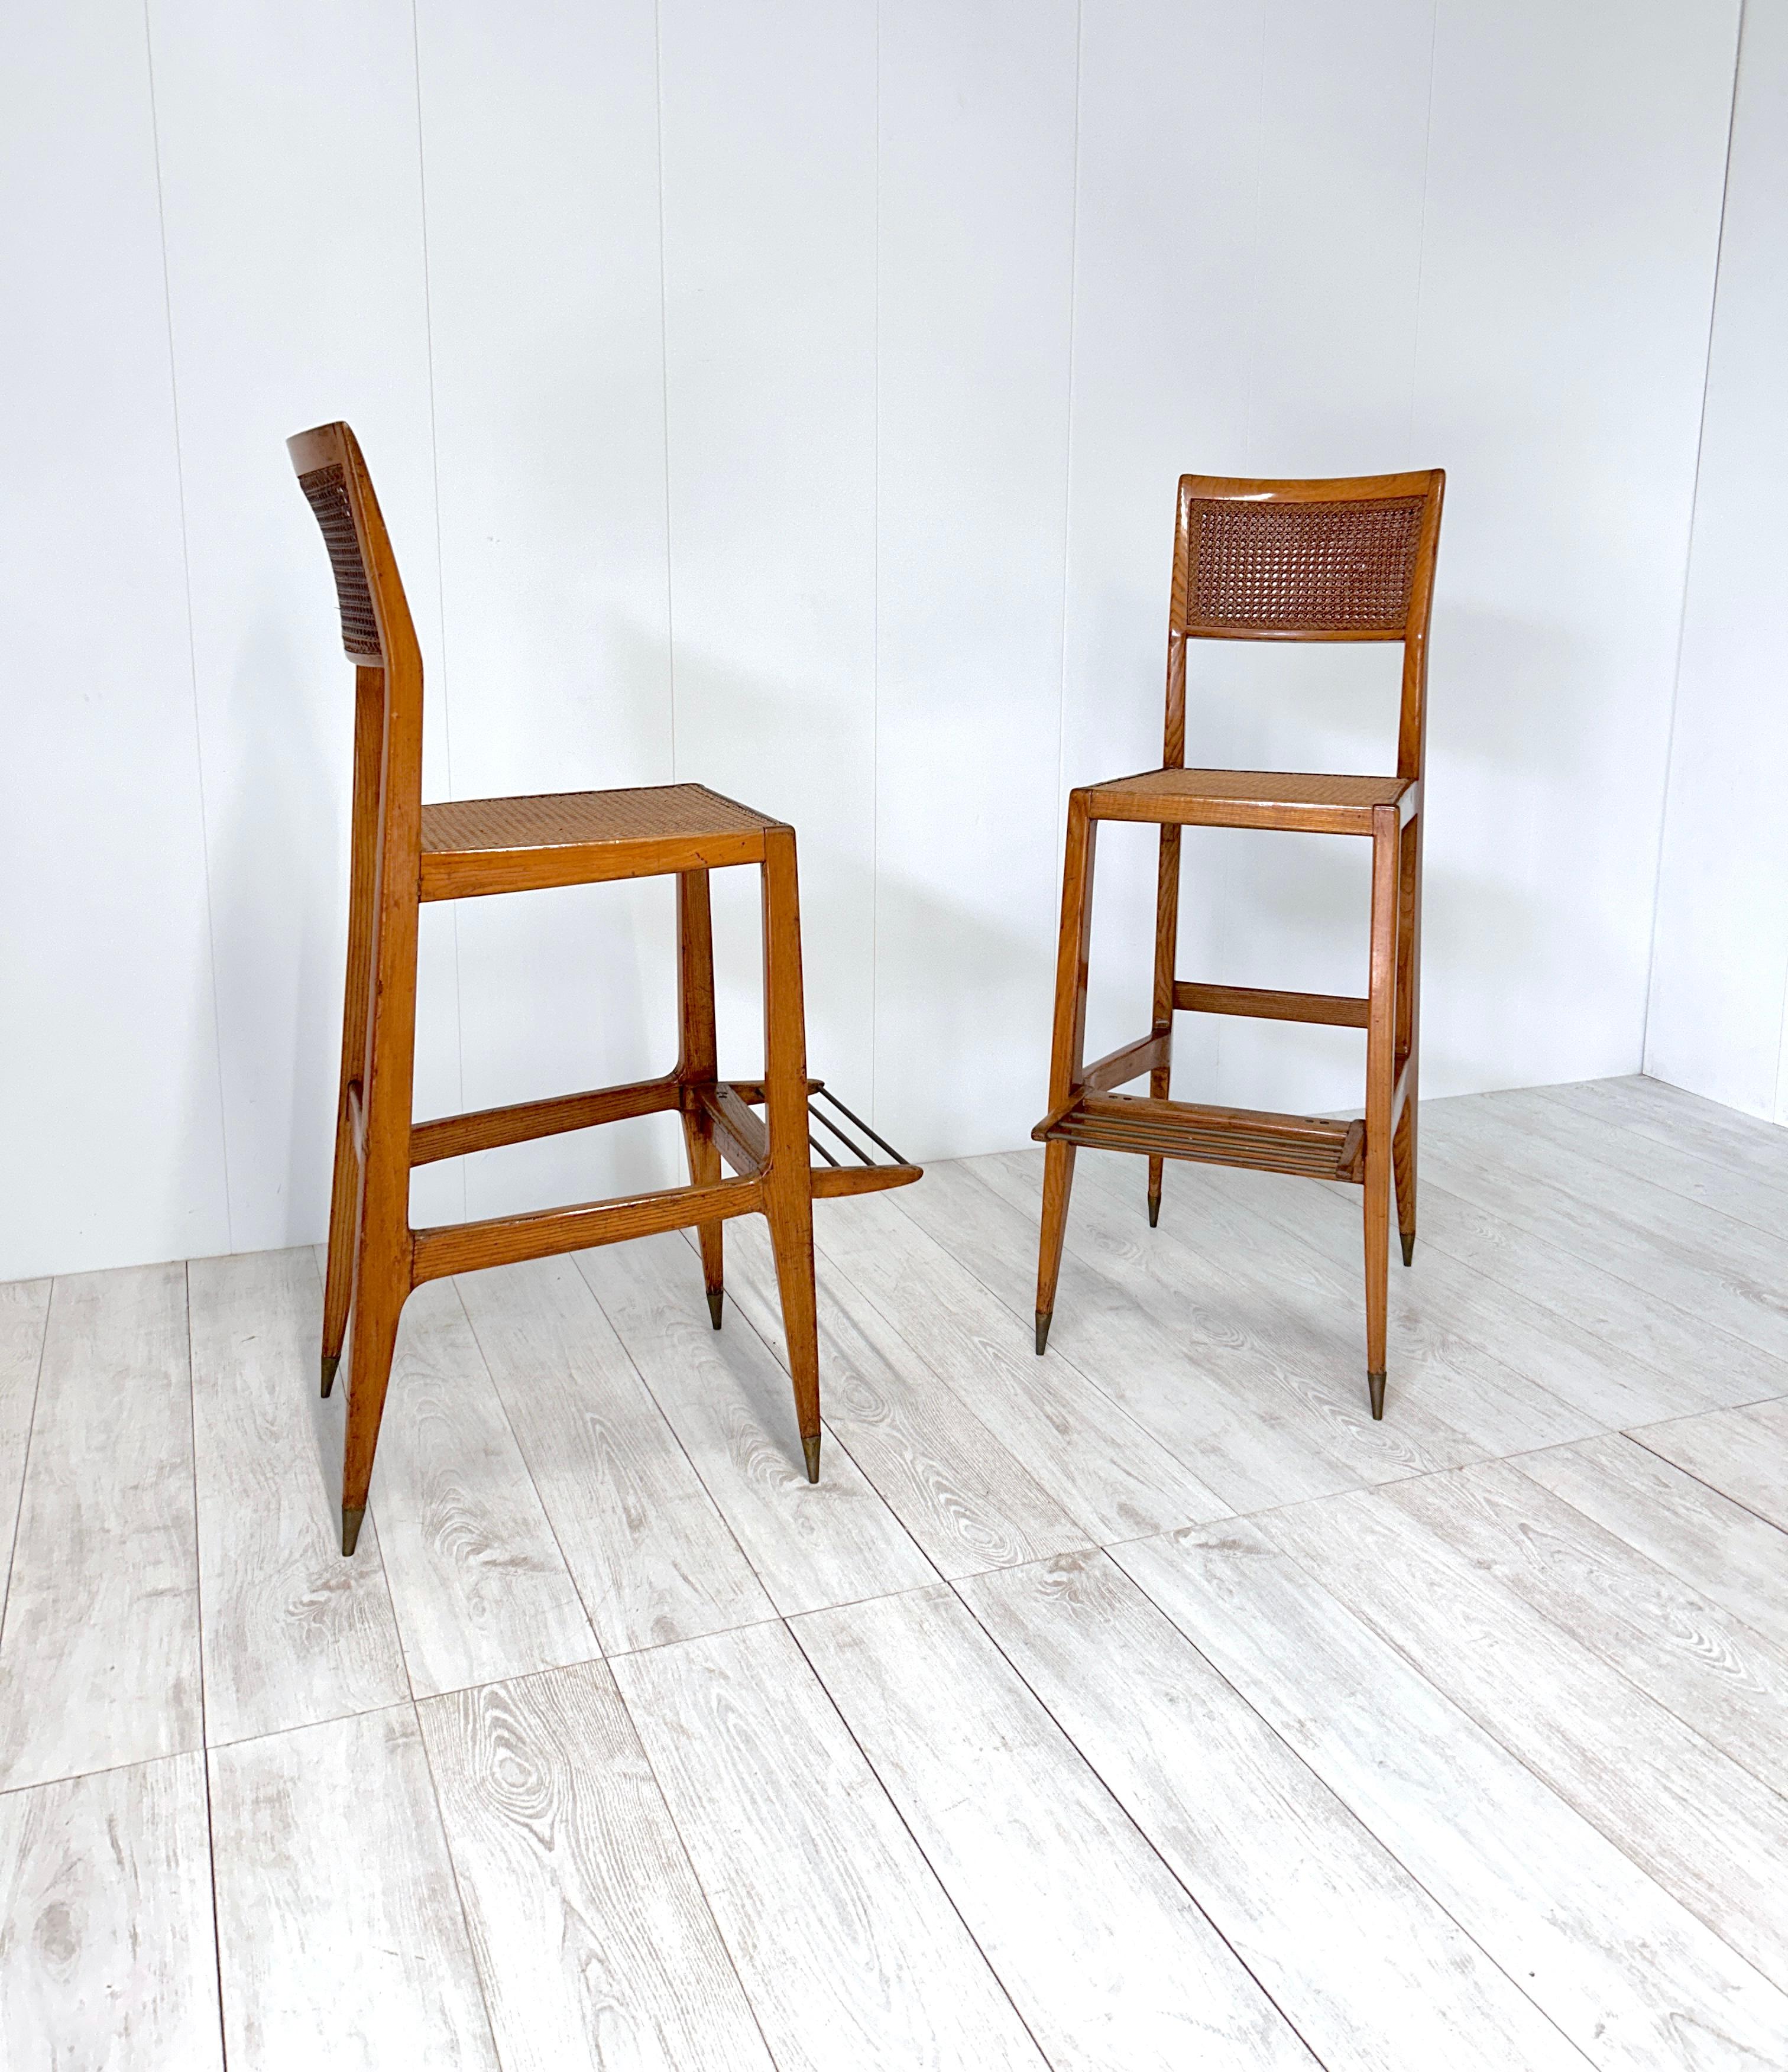 Pair of croupier stools made for Casino di Sanremo (Italy) in the 1950s.
Ash wood frame, brass ferrules, Vienna straw seat and back.

Great vintage condition. 
